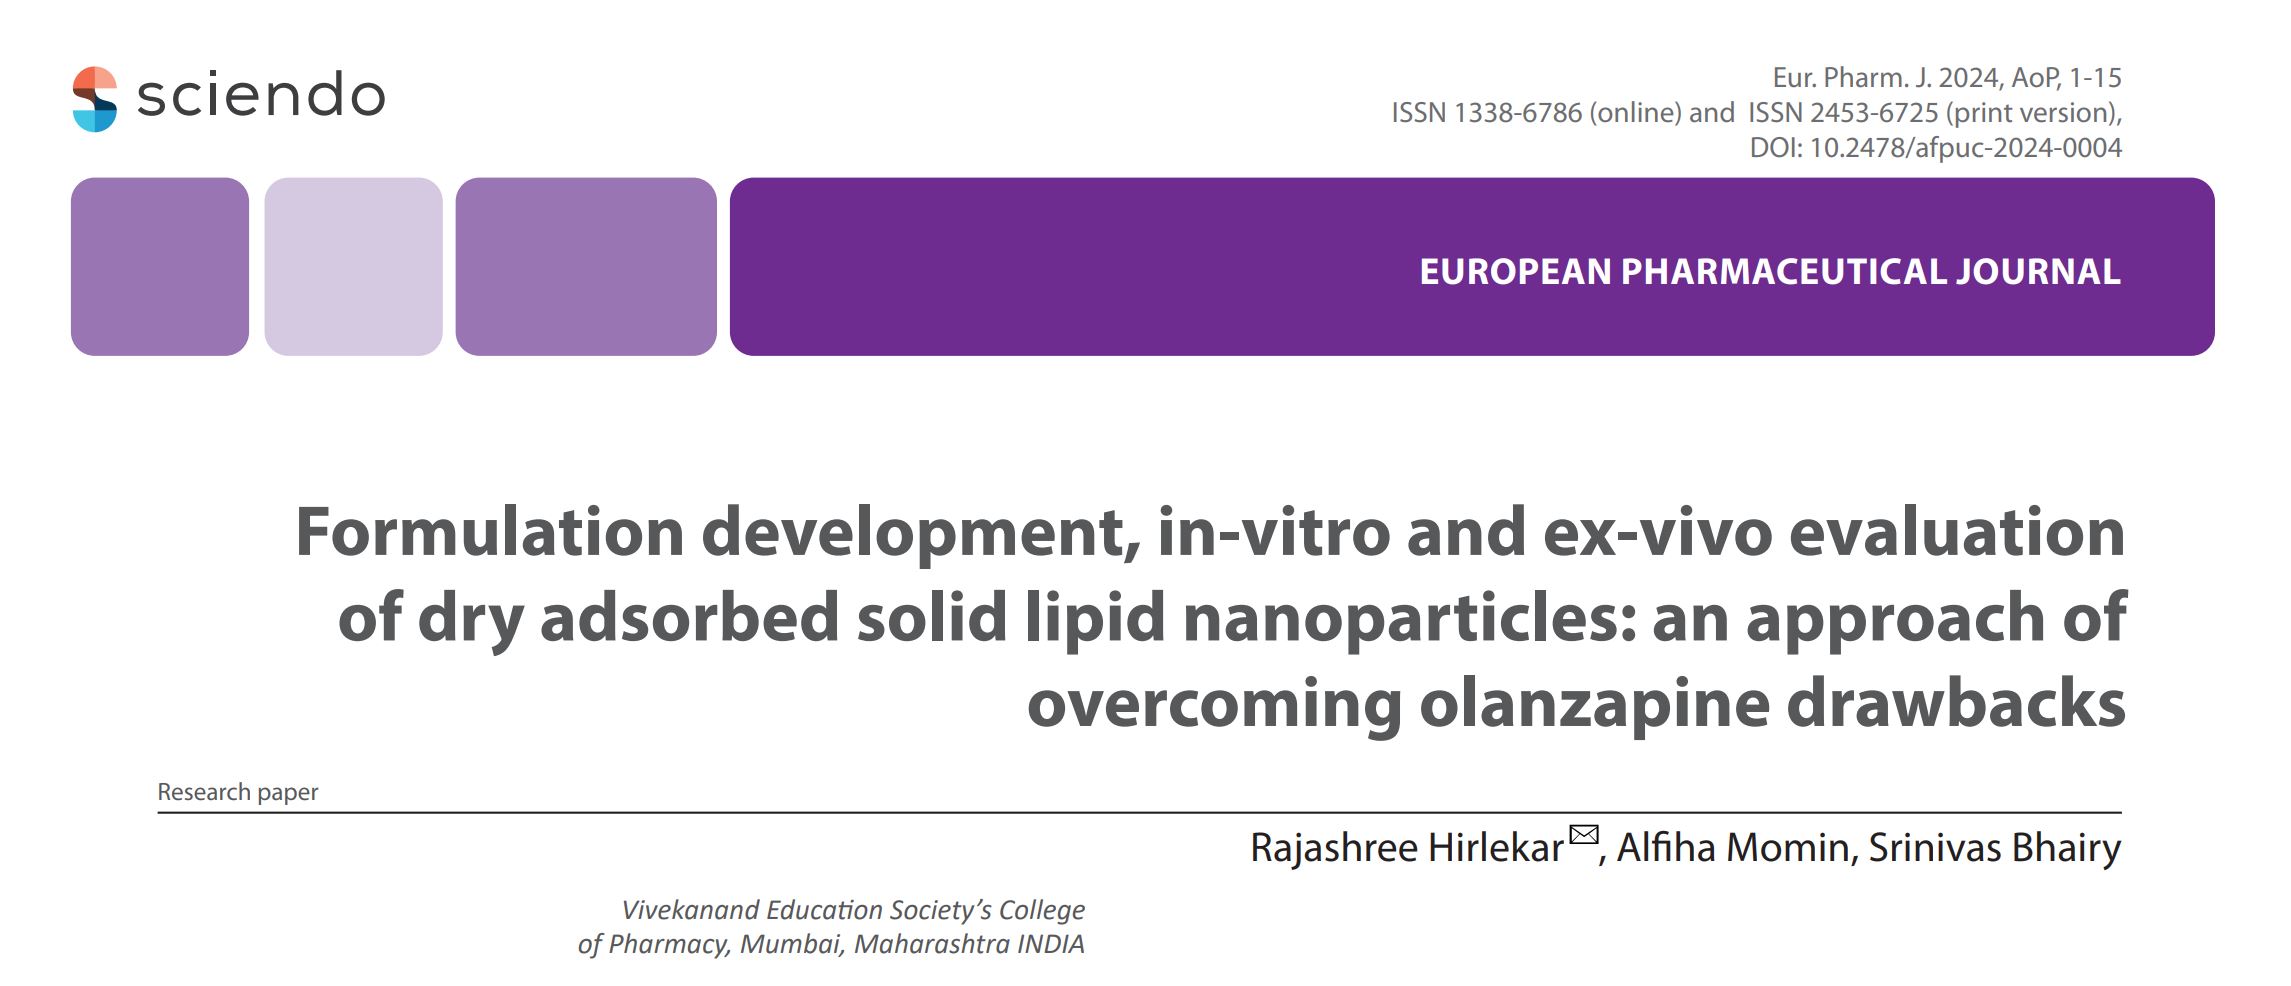 Formulation development, in-vitro and ex-vivo evaluation of dry adsorbed solid lipid nanoparticles